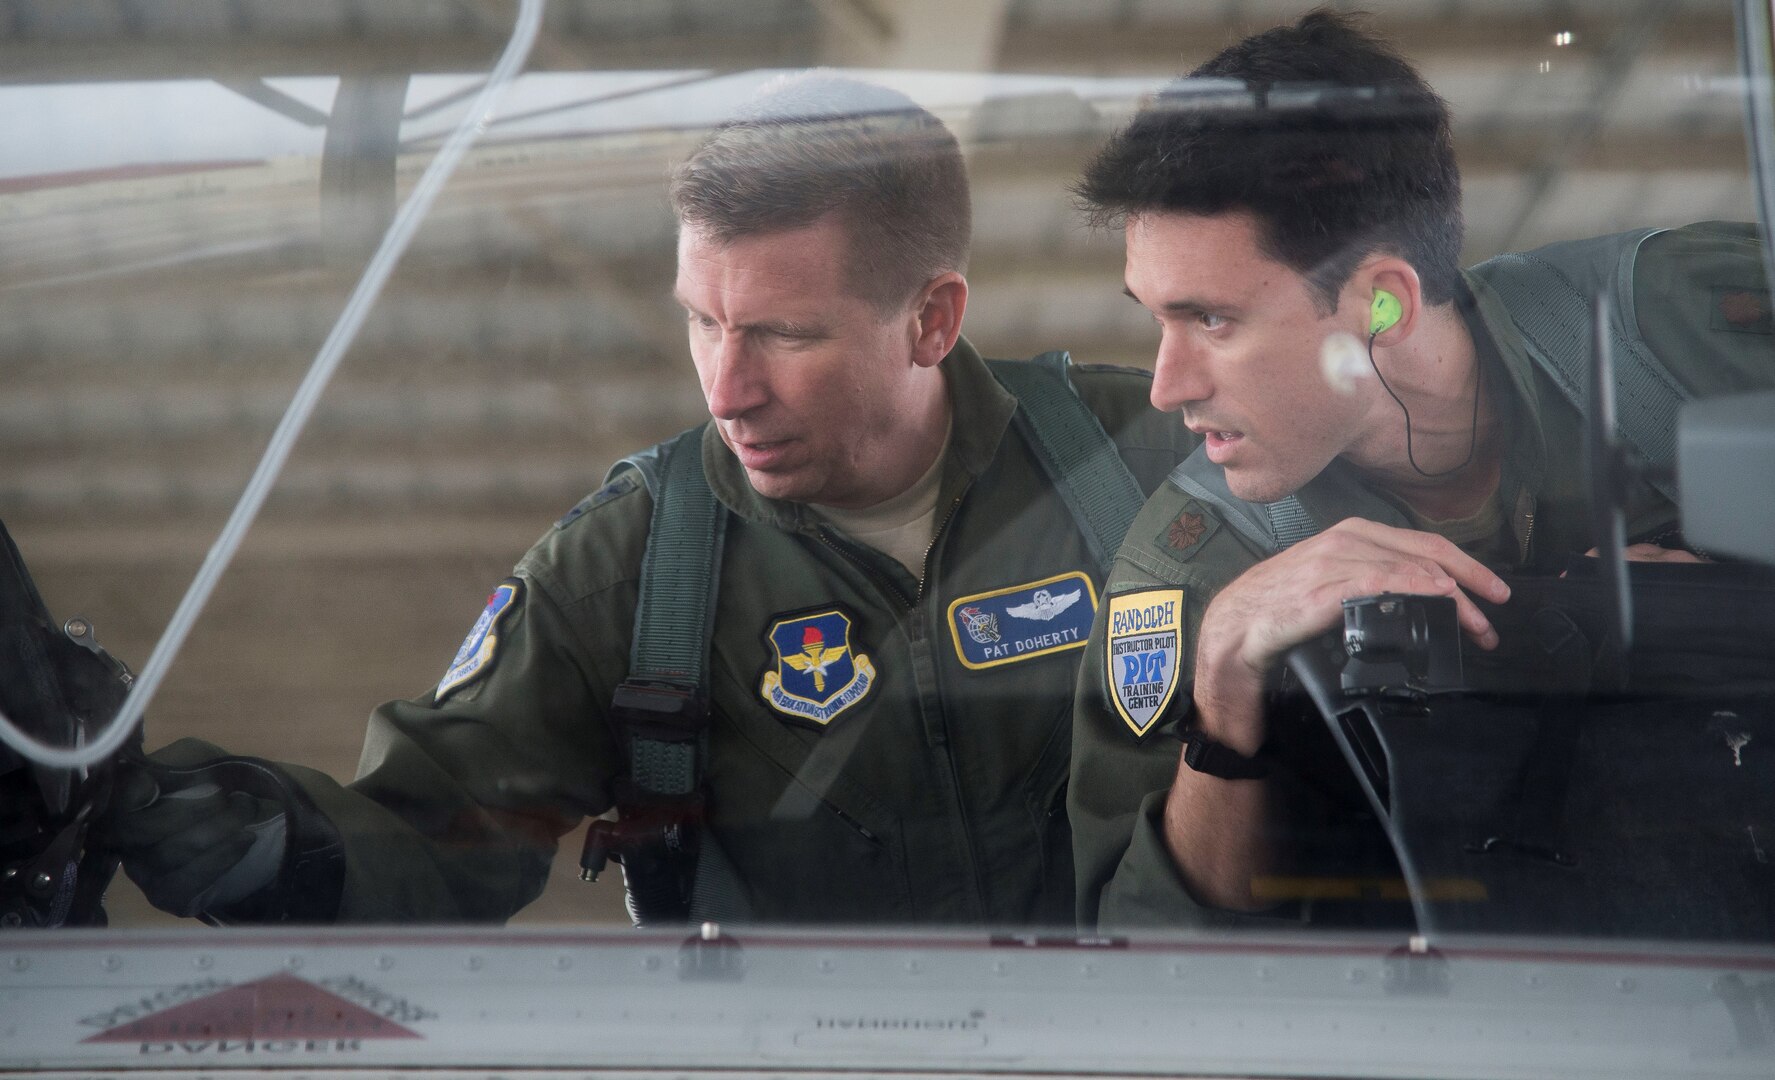 Maj. Gen. Patrick Doherty (left), 19th Air Force commander, and Maj. Lincoln Olsen, T-6 Texan II instructor pilot, conduct a T-6 Texan II safety check before conducting an operational demonstration at Joint Base San Antonio-Randolph Feb. 21, 2018. Doherty was on the flightline getting test data first-hand during the command-wide T-6 operational pause.